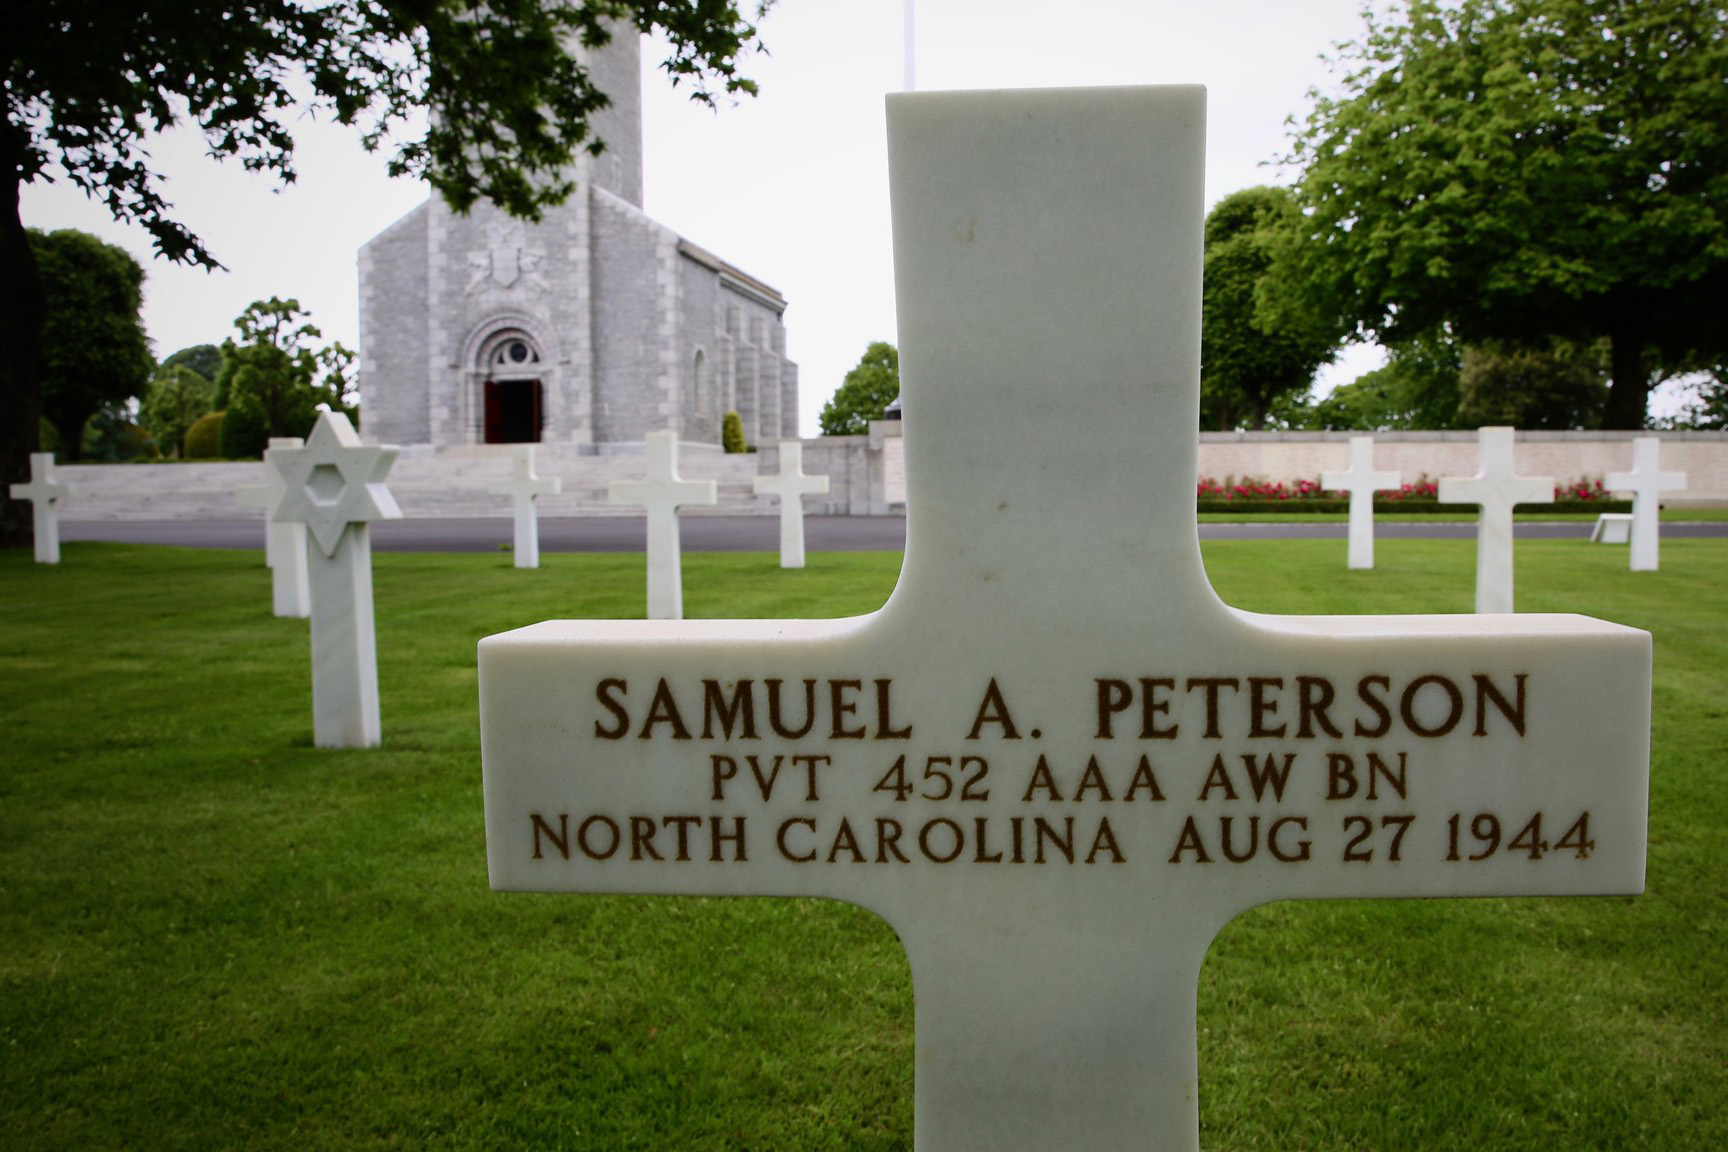 Chancy rubbed sand from Omaha Beach into the grave marker of Samuel Peterson, of Charlotte, in a custom that enables the name on the marker to stand out. Peterson is among several African American soldiers and sailors laid to rest at the Brittany American Cemetery.